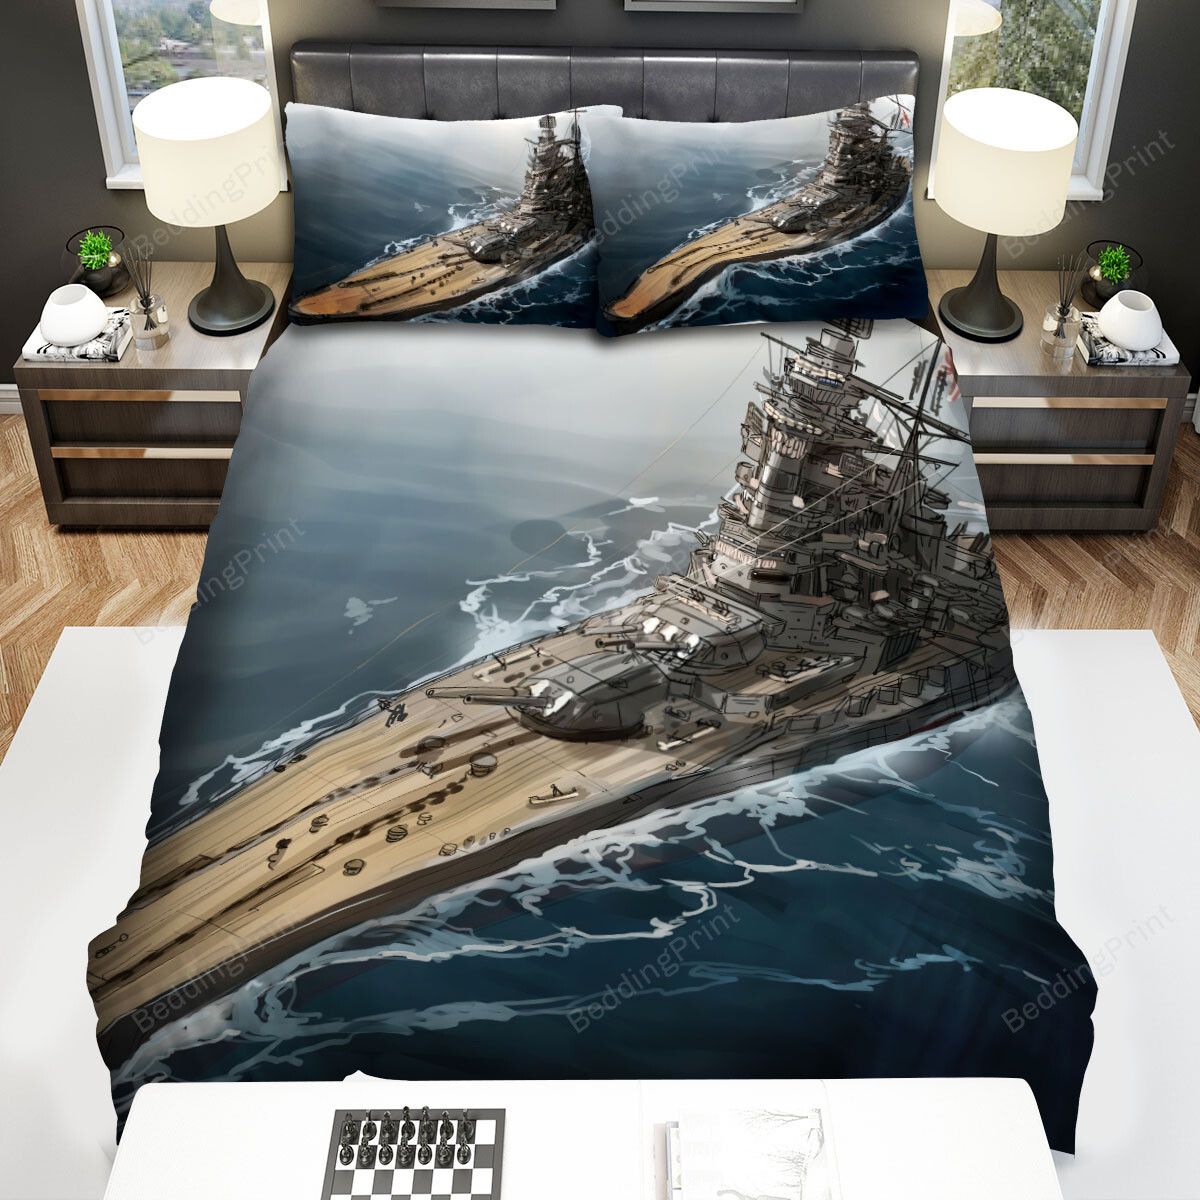 BEST One Piece All Cast Embossed Anime Duvet Cover Bed Sets • Kybershop